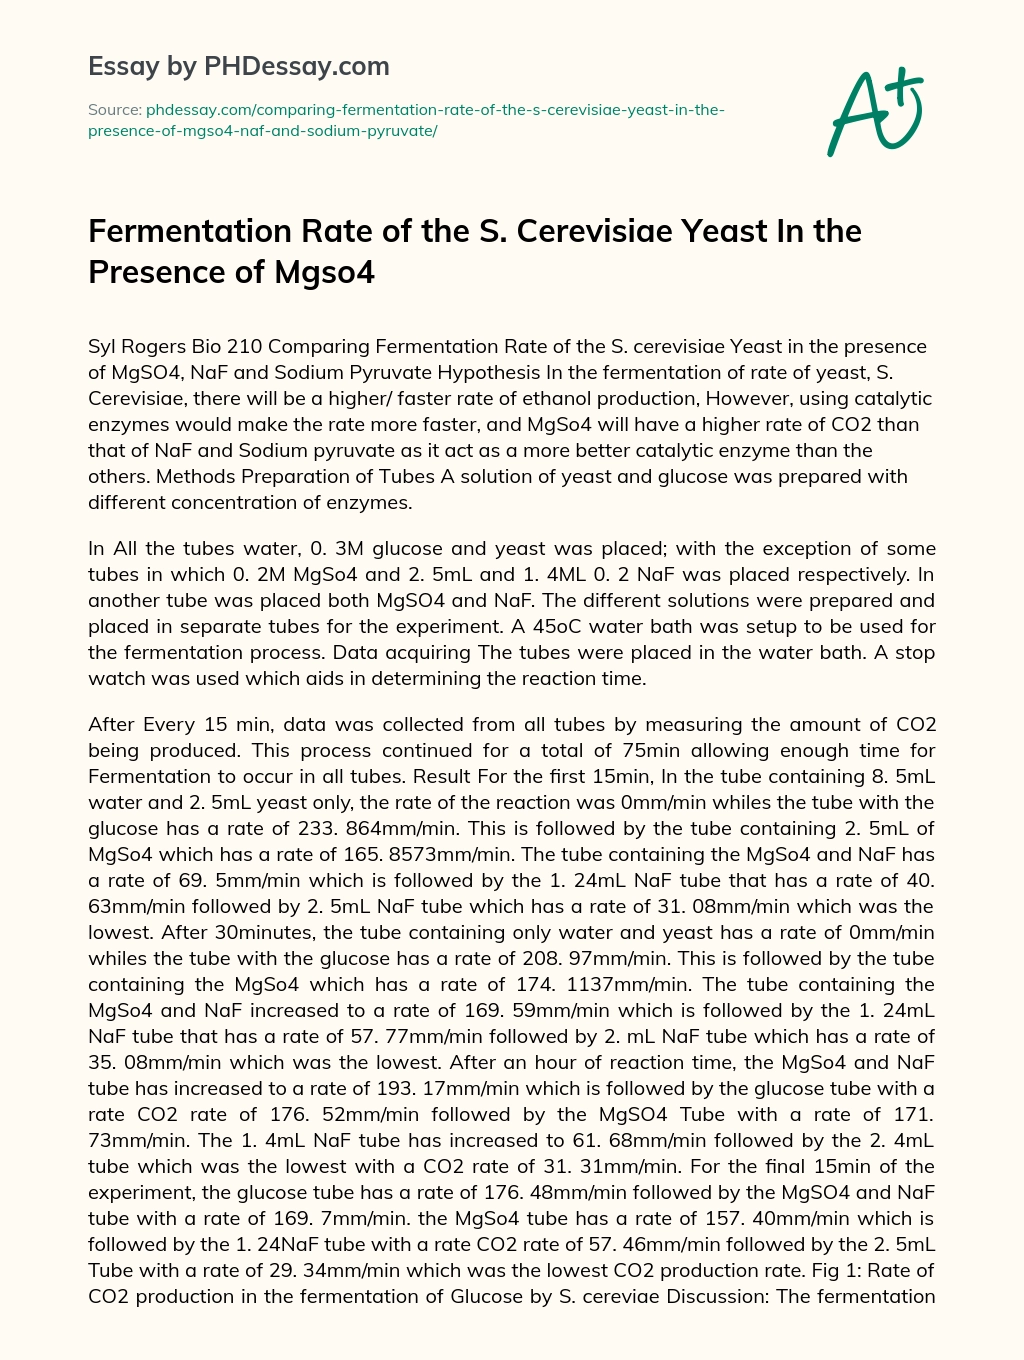 Fermentation Rate of the S. Cerevisiae Yeast In the Presence of Mgso4 essay